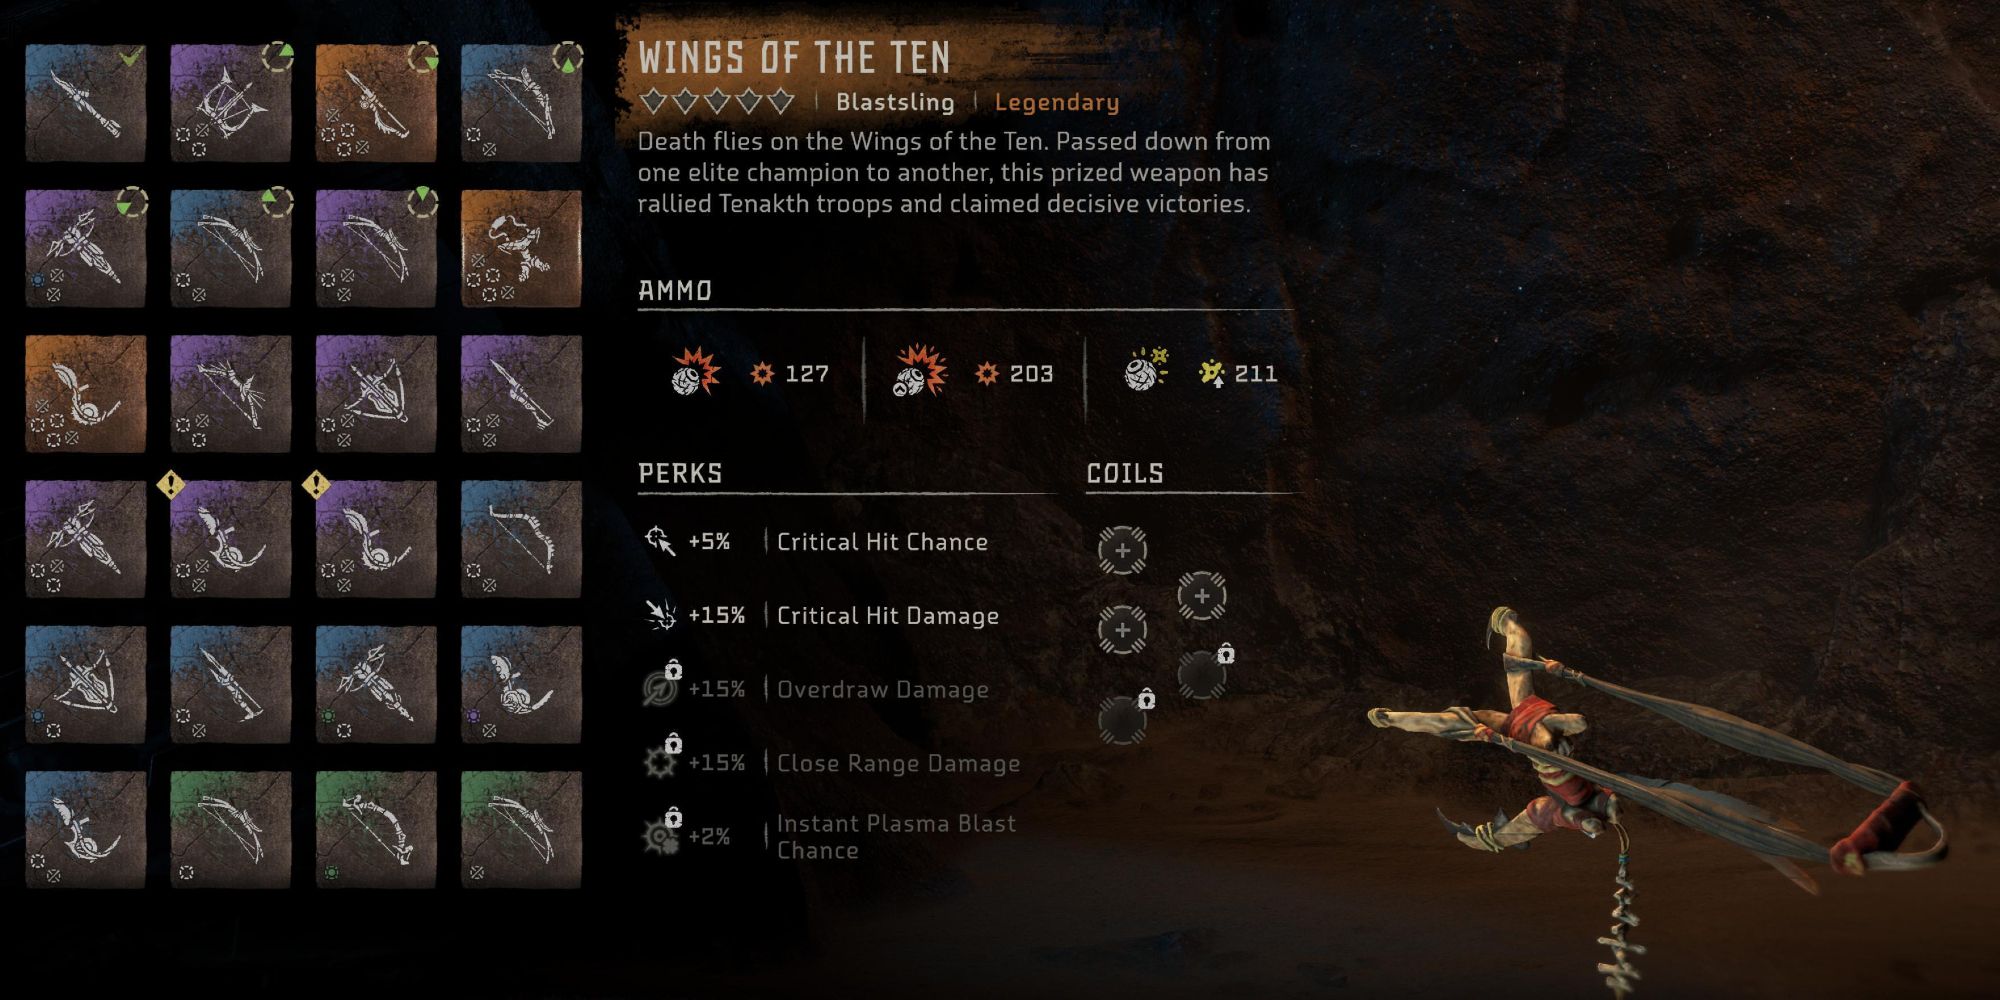 Image of the Horizon Forbidden West Legendary Weapon Wings of the Ten in a menu.